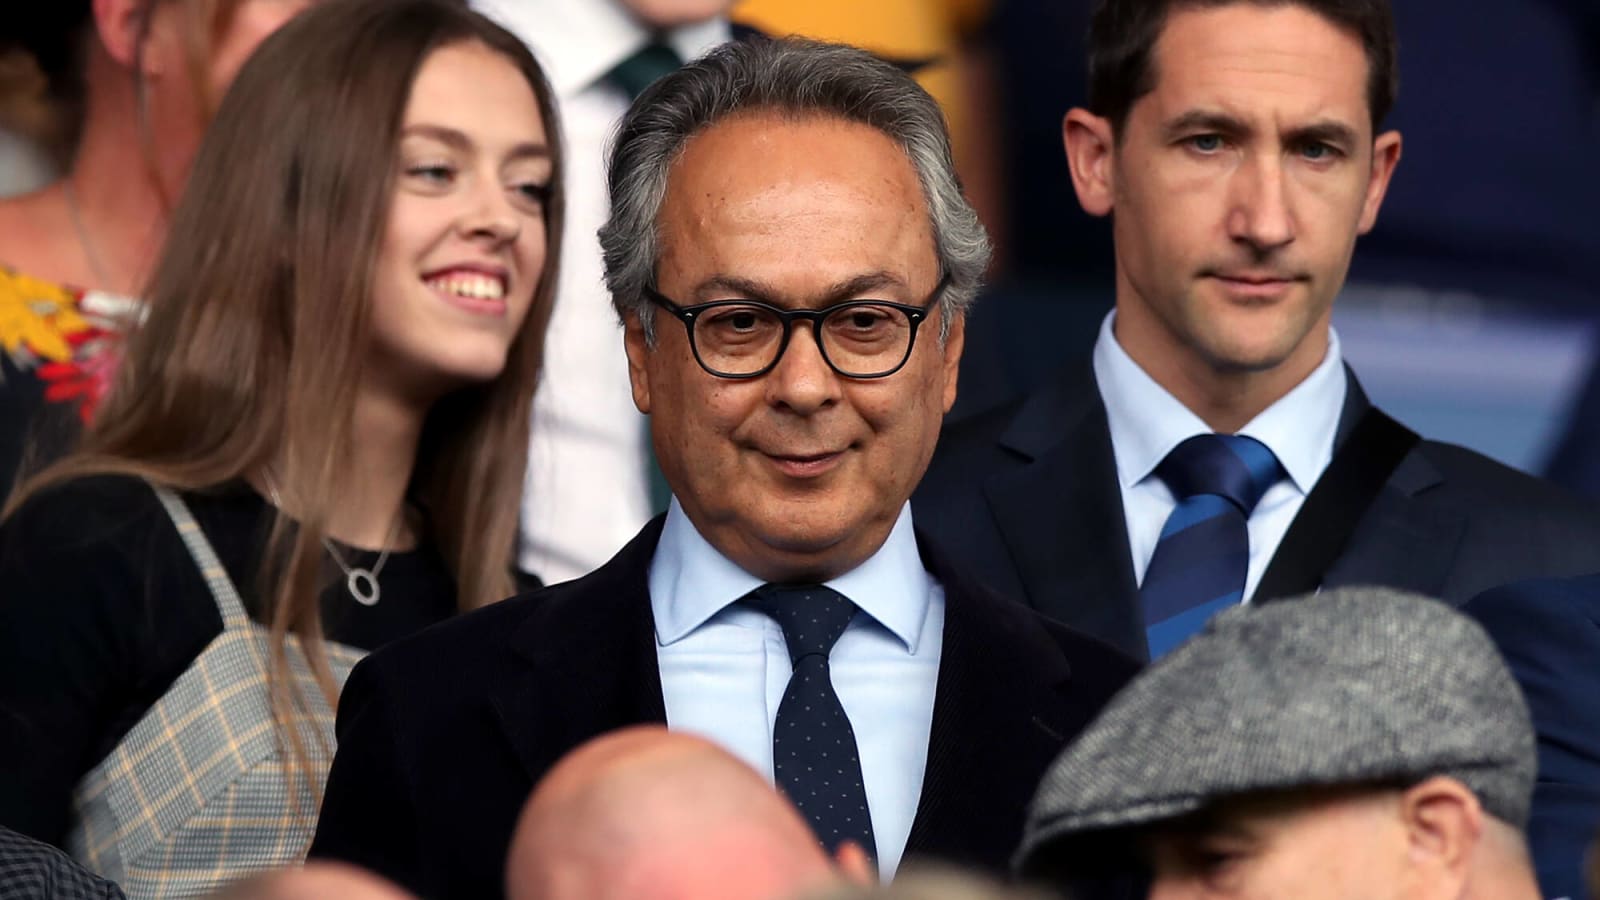 New Everton owners reach agreement after months of uncertainty as Farhad Moshiri sells majority stake